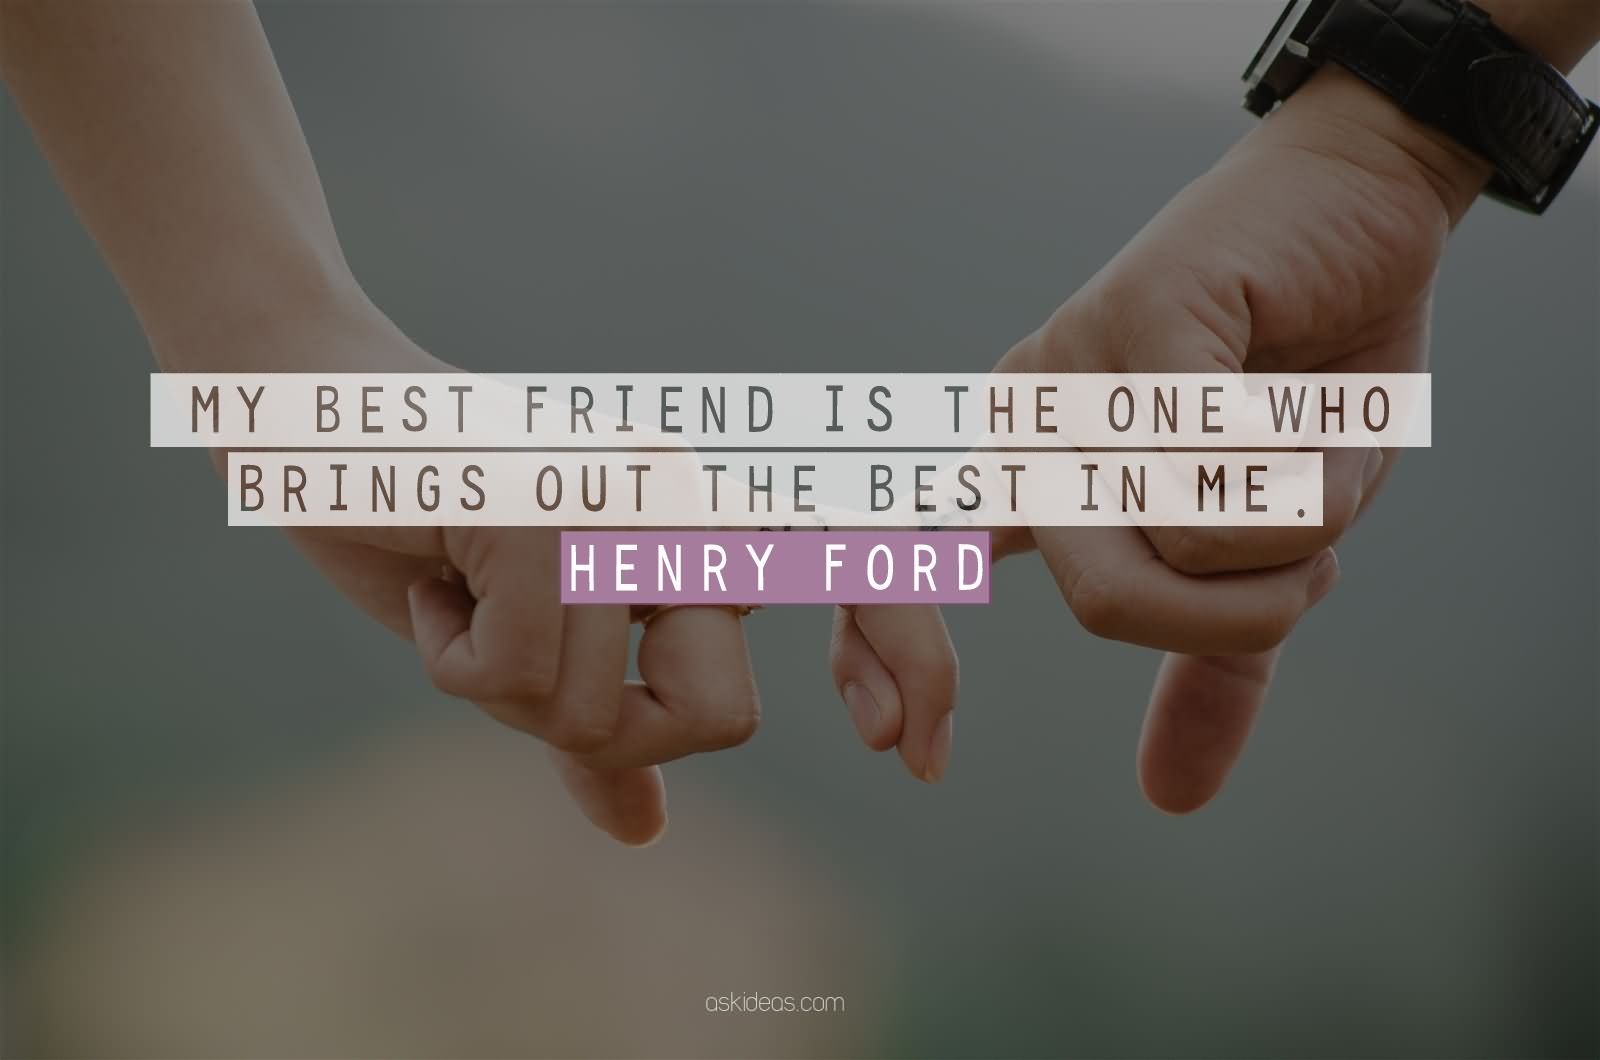 40+ Best Friend Quotes & Sayings With Images